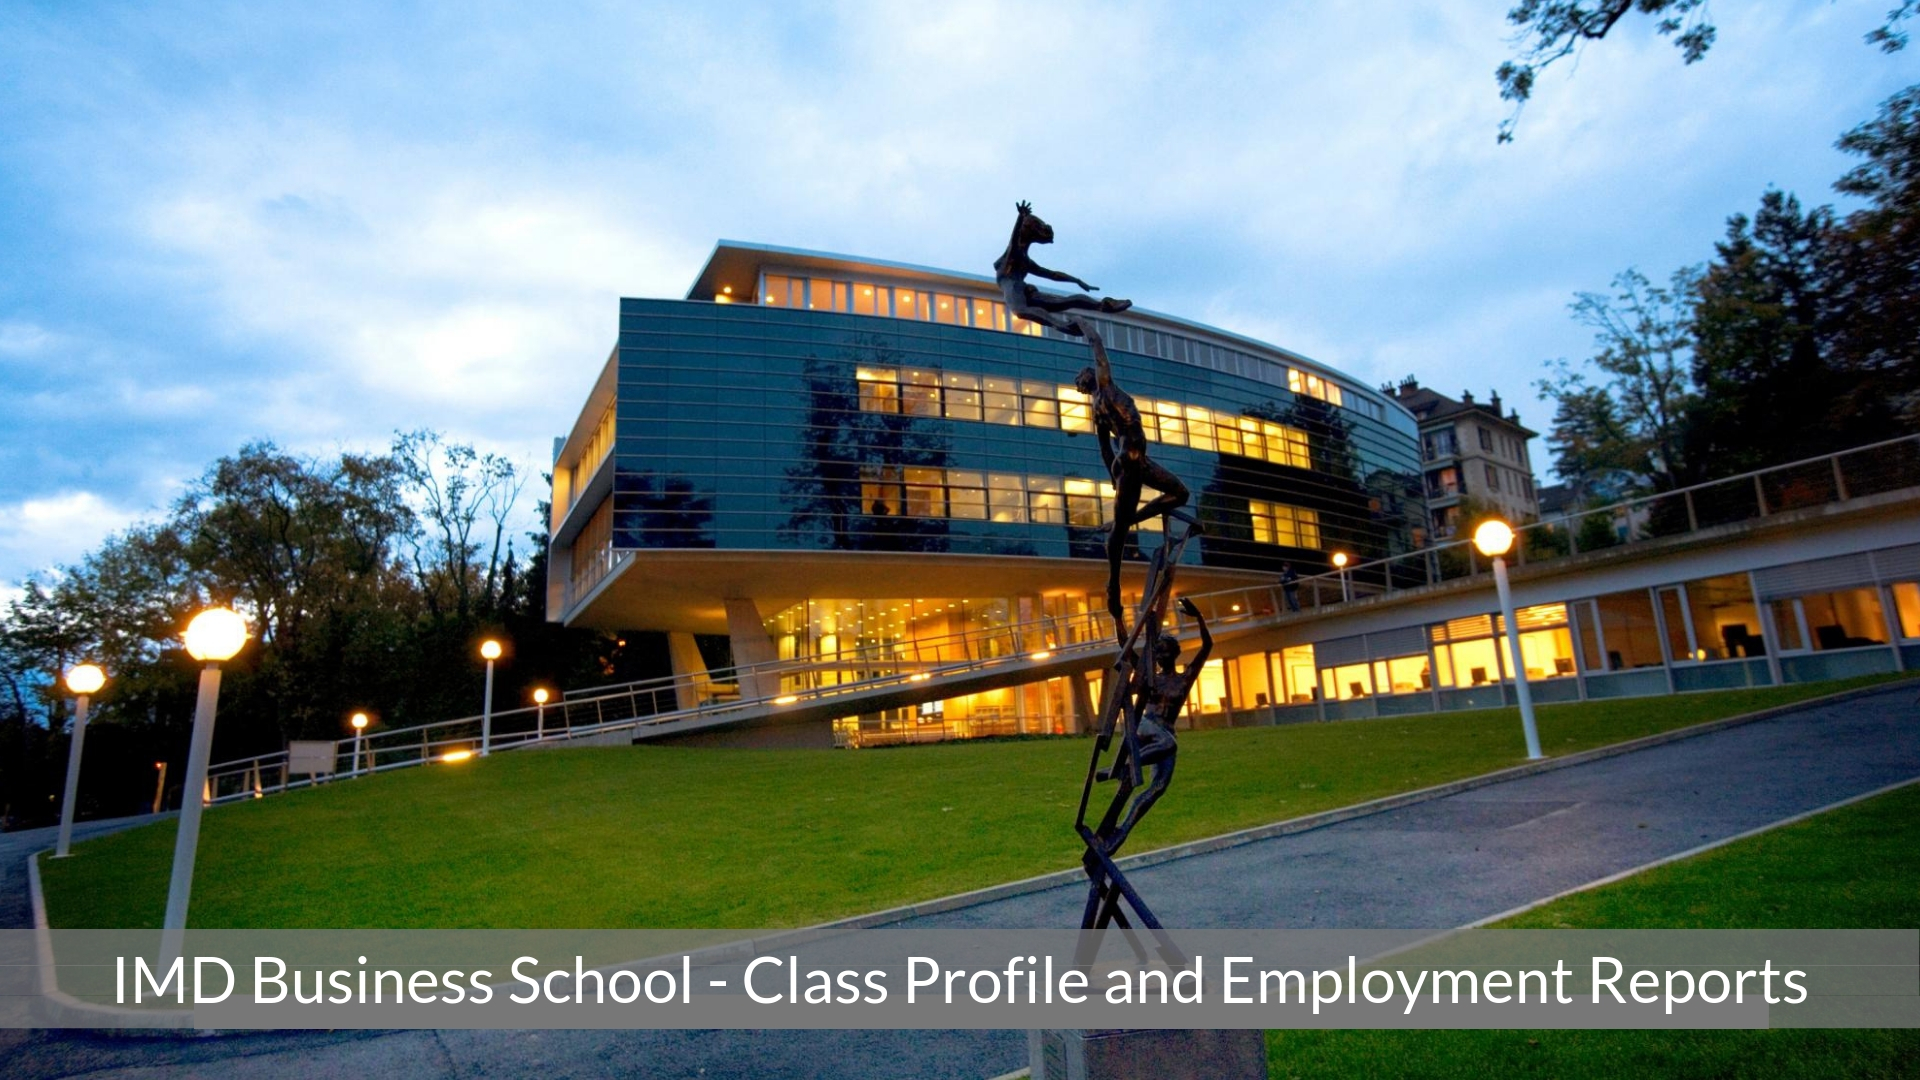 IMD Business School - IMD MBA Program - Class Profile, Employment Reports and Notable Alumni